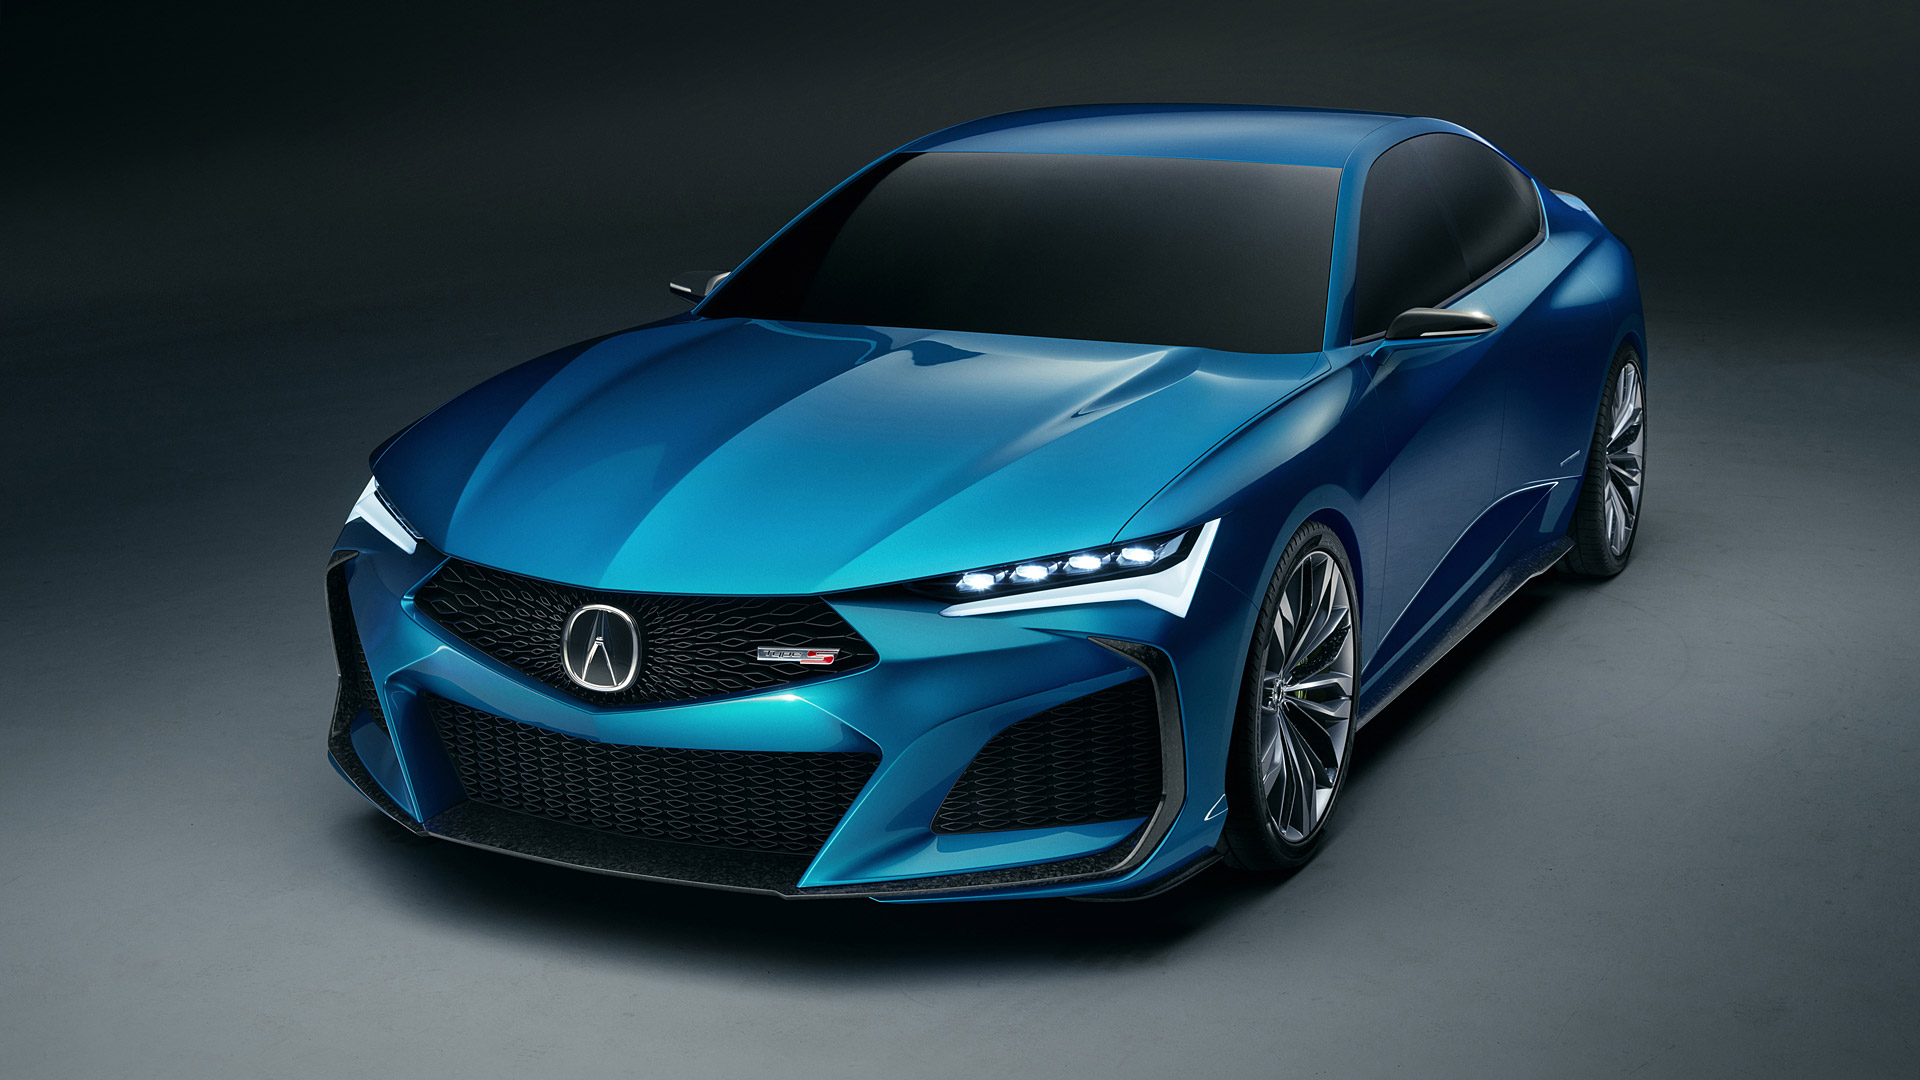 Acura Tlx Type S Concept - HD Wallpaper 